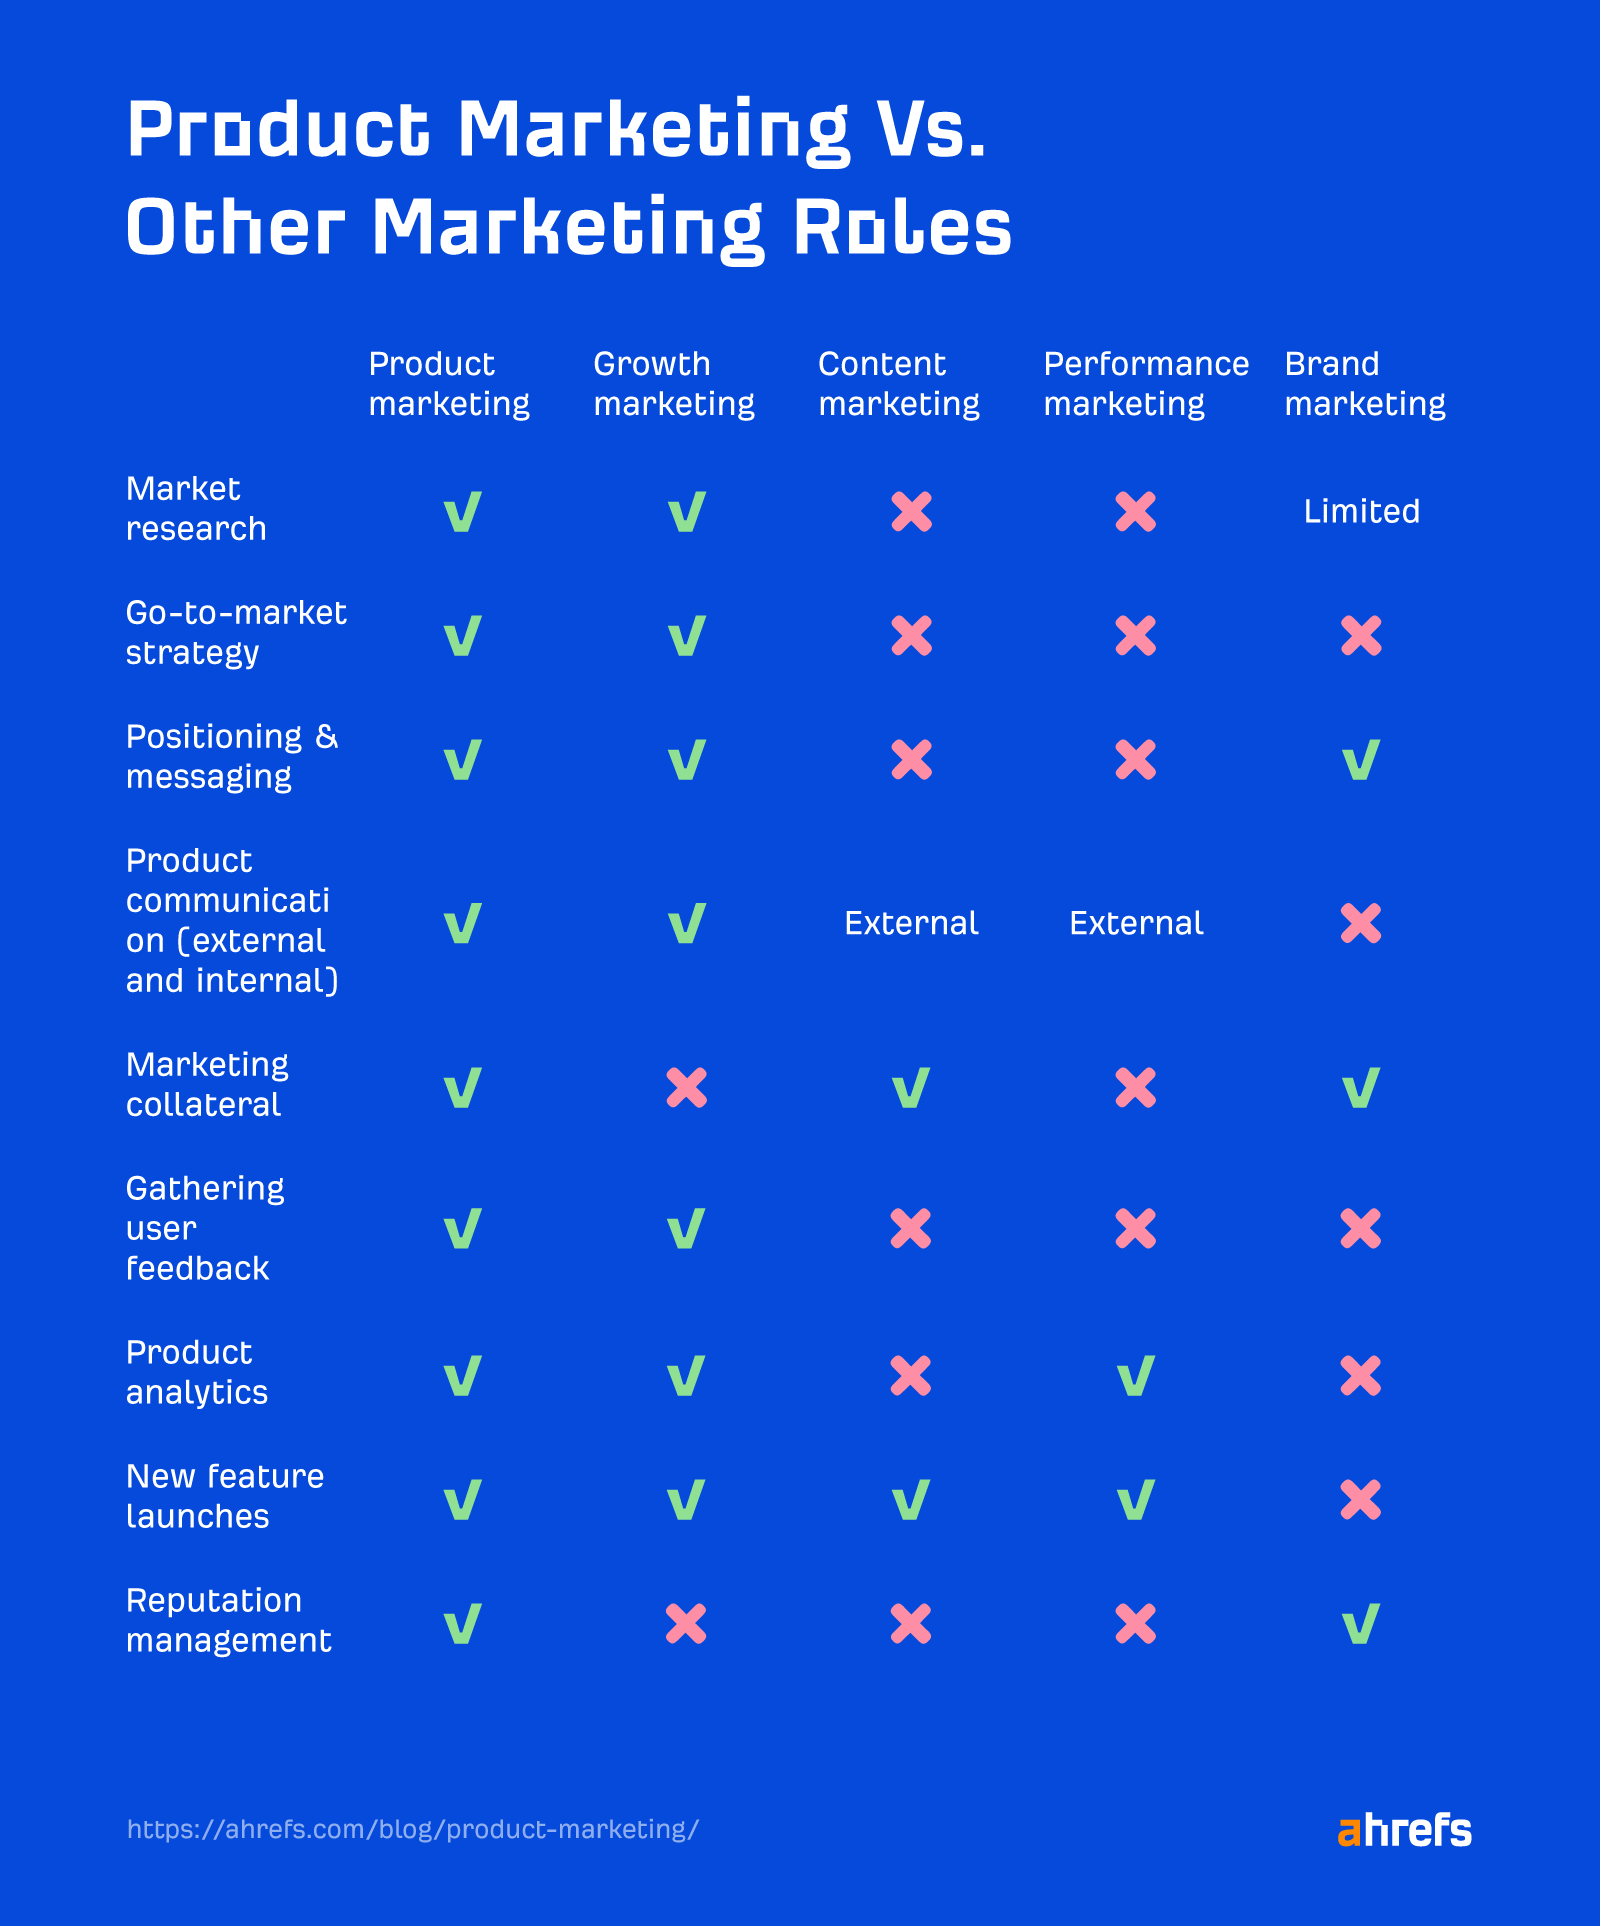 Product marketing vs. other marketing roles.